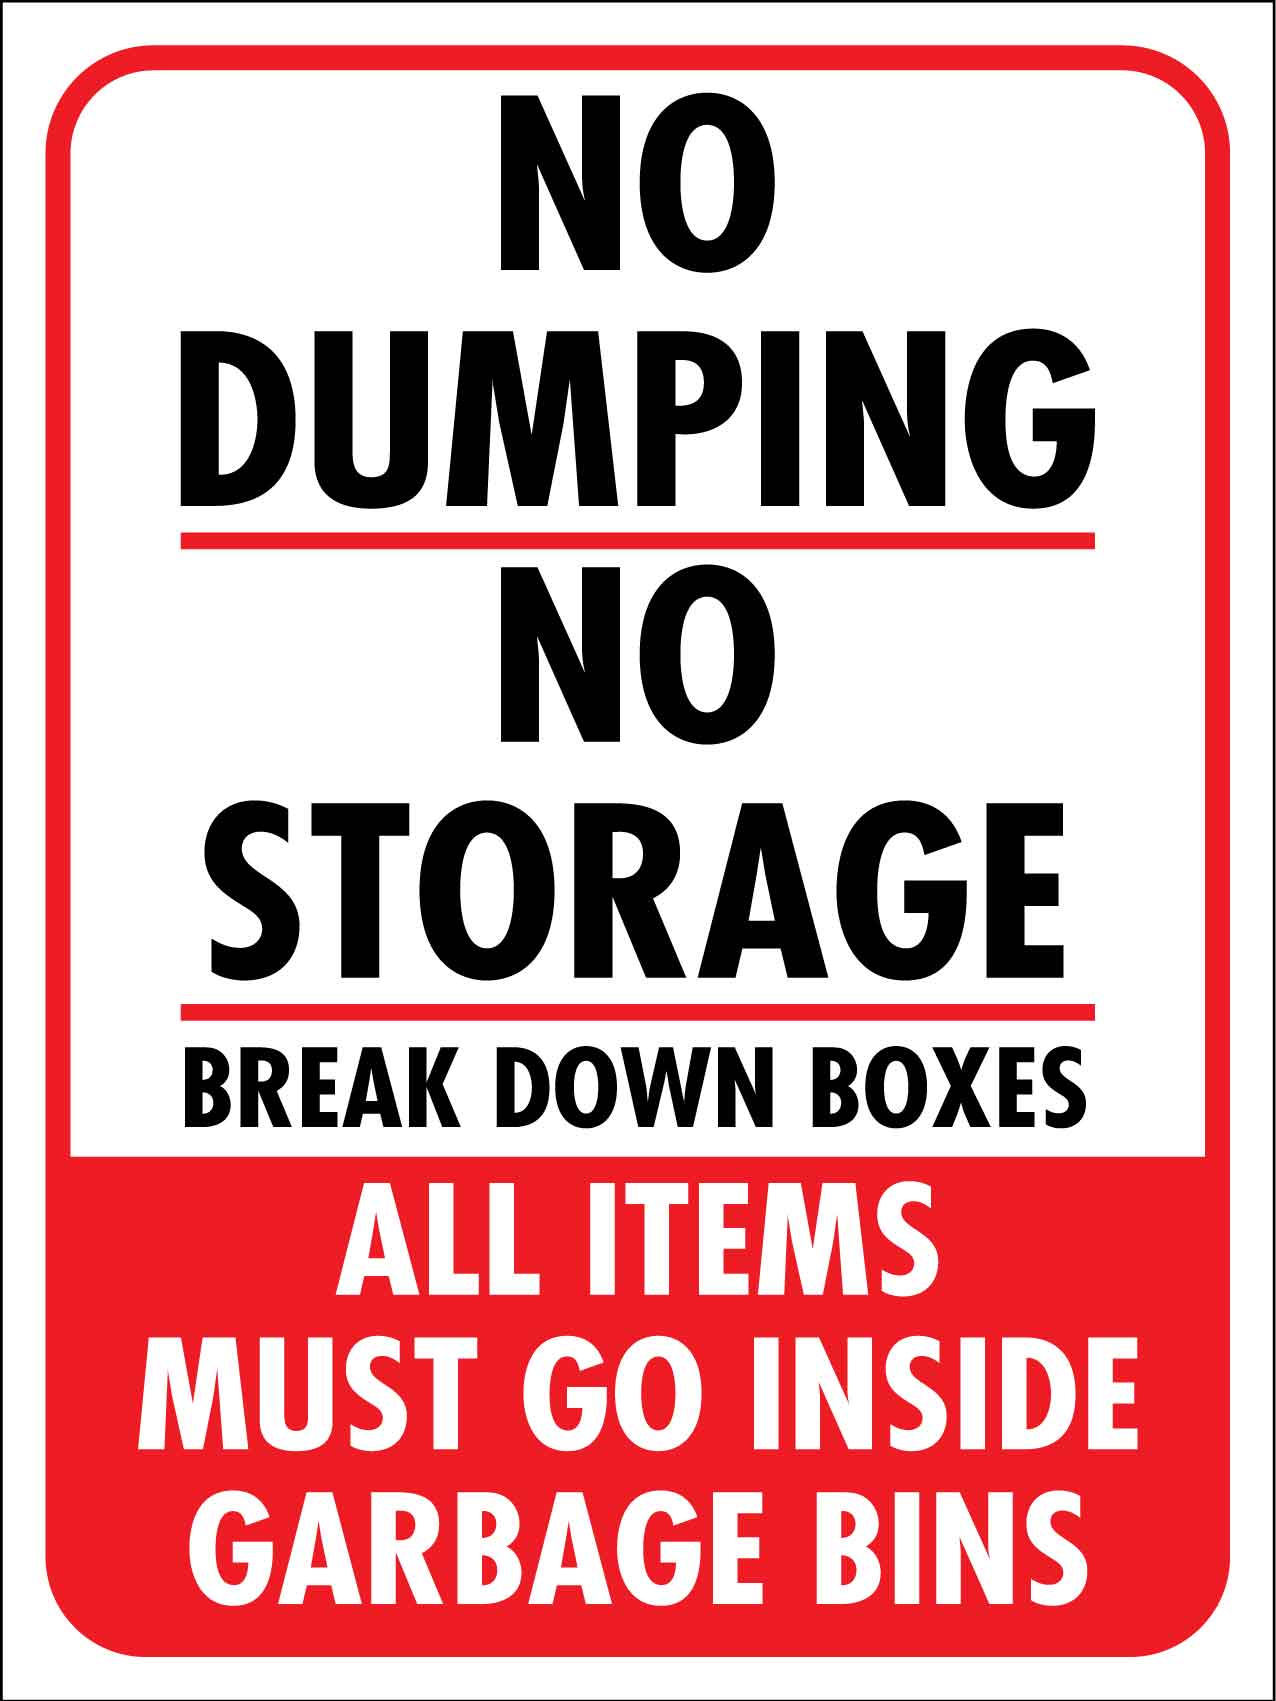 No Dumping No Storage Break Down Boxes All Items Must Go Inside Garbage Bins Sign